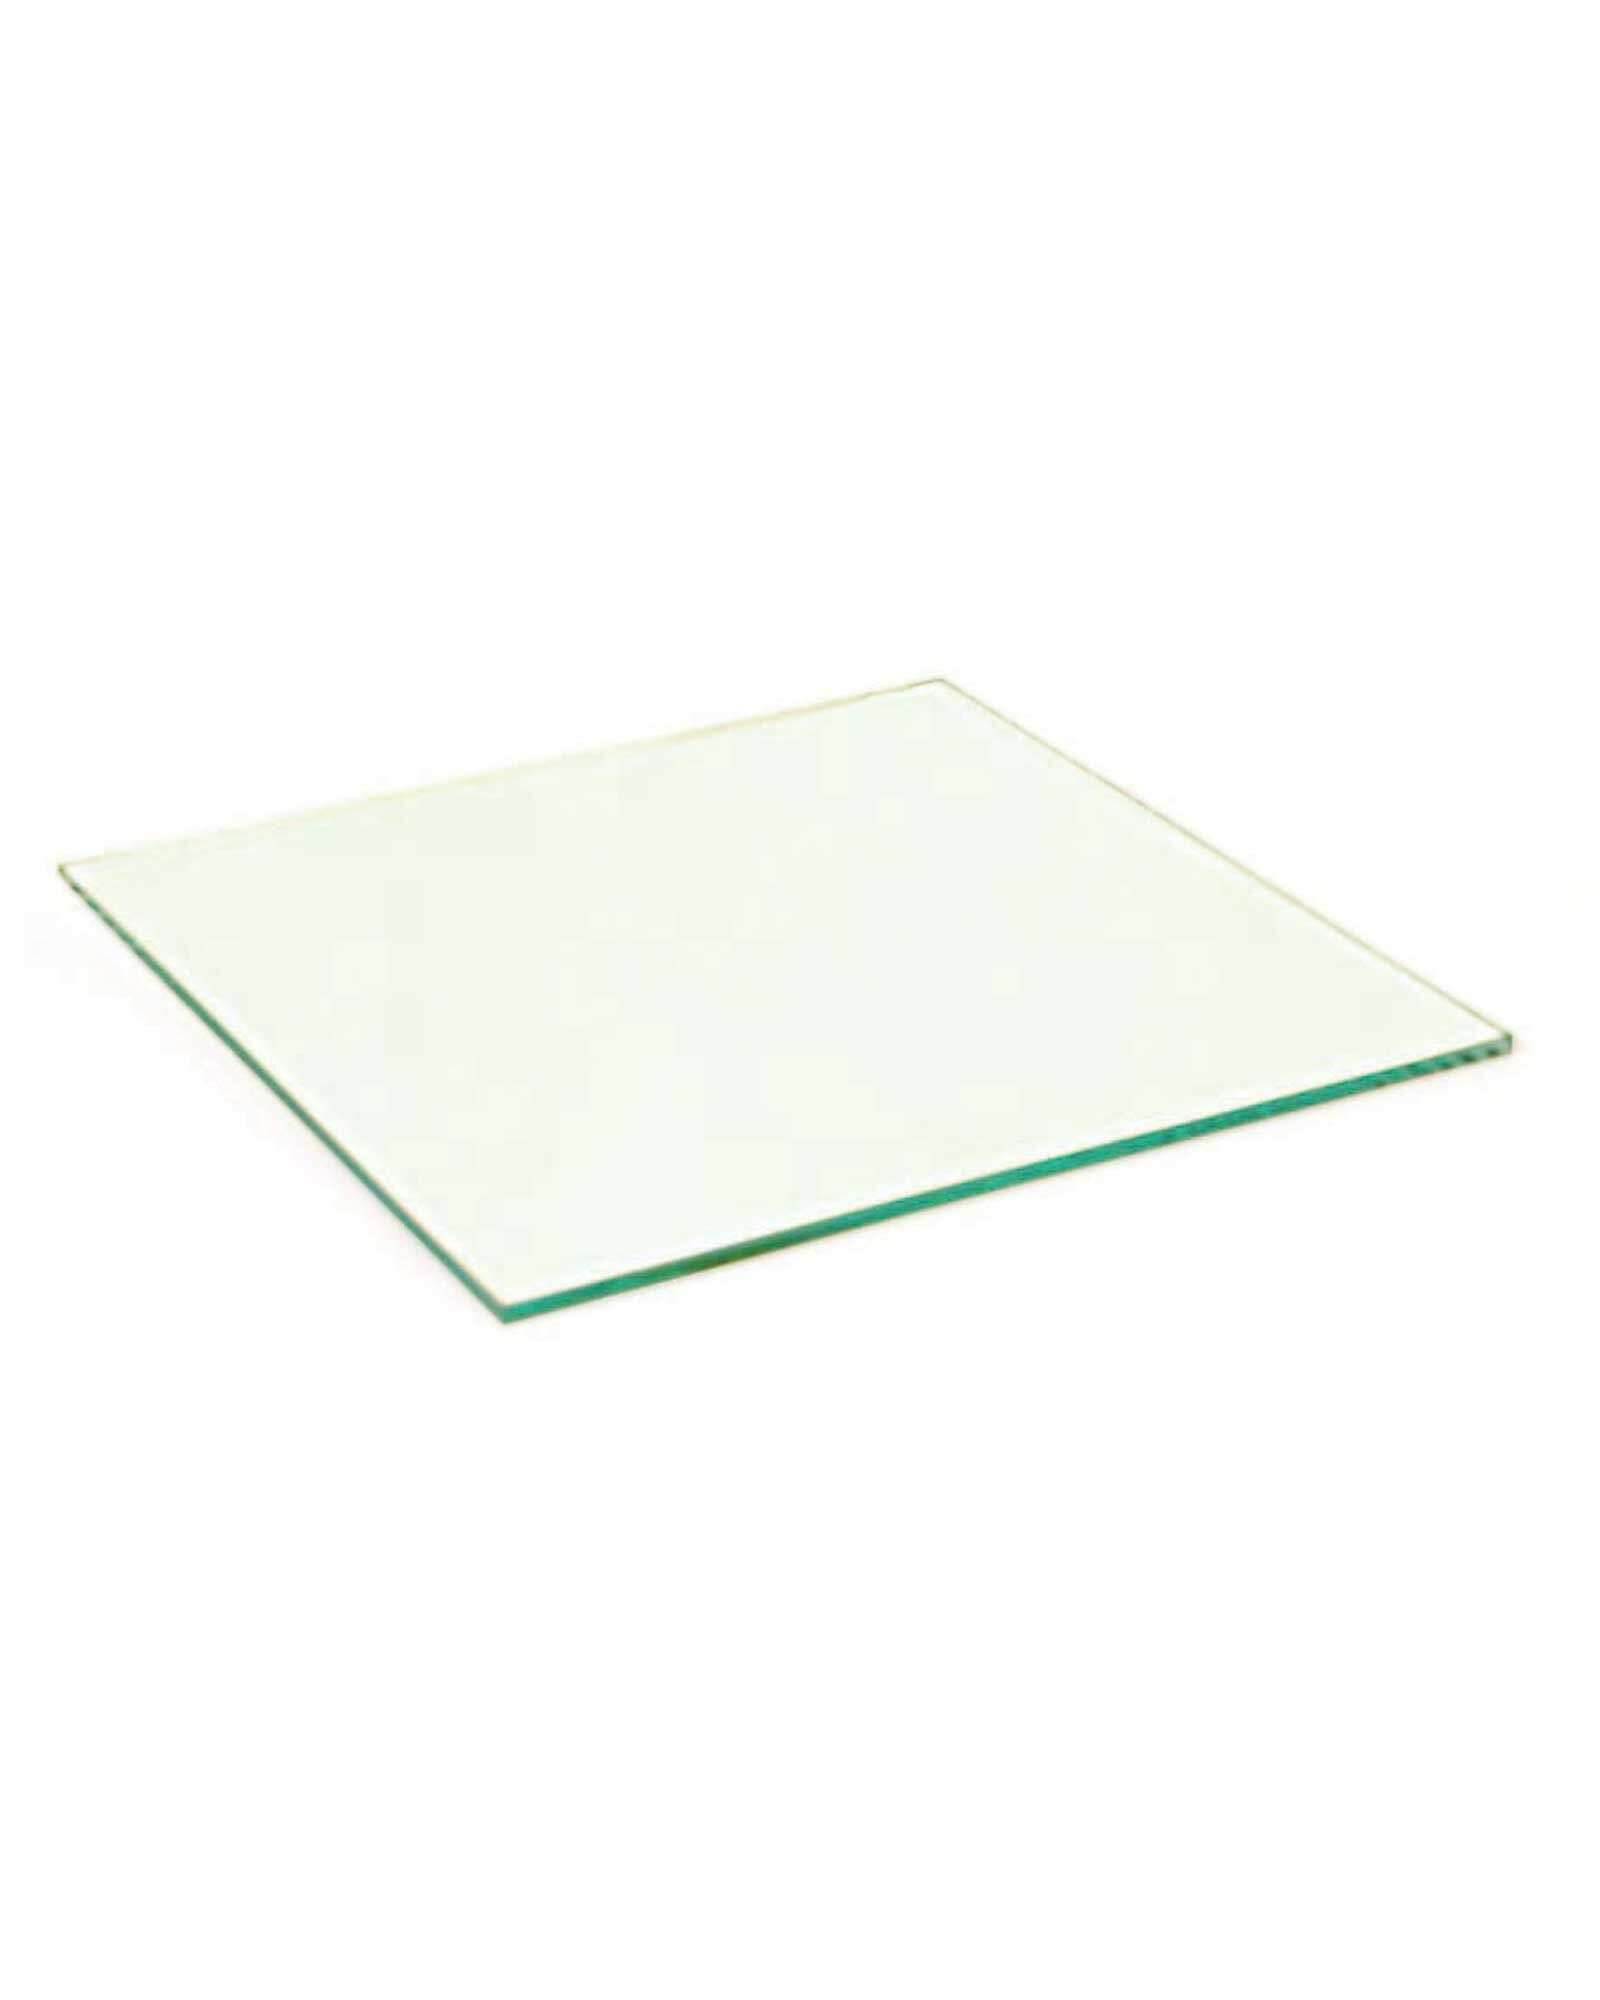 Extra Large Glass Mullers and sandblasted mixing plates.